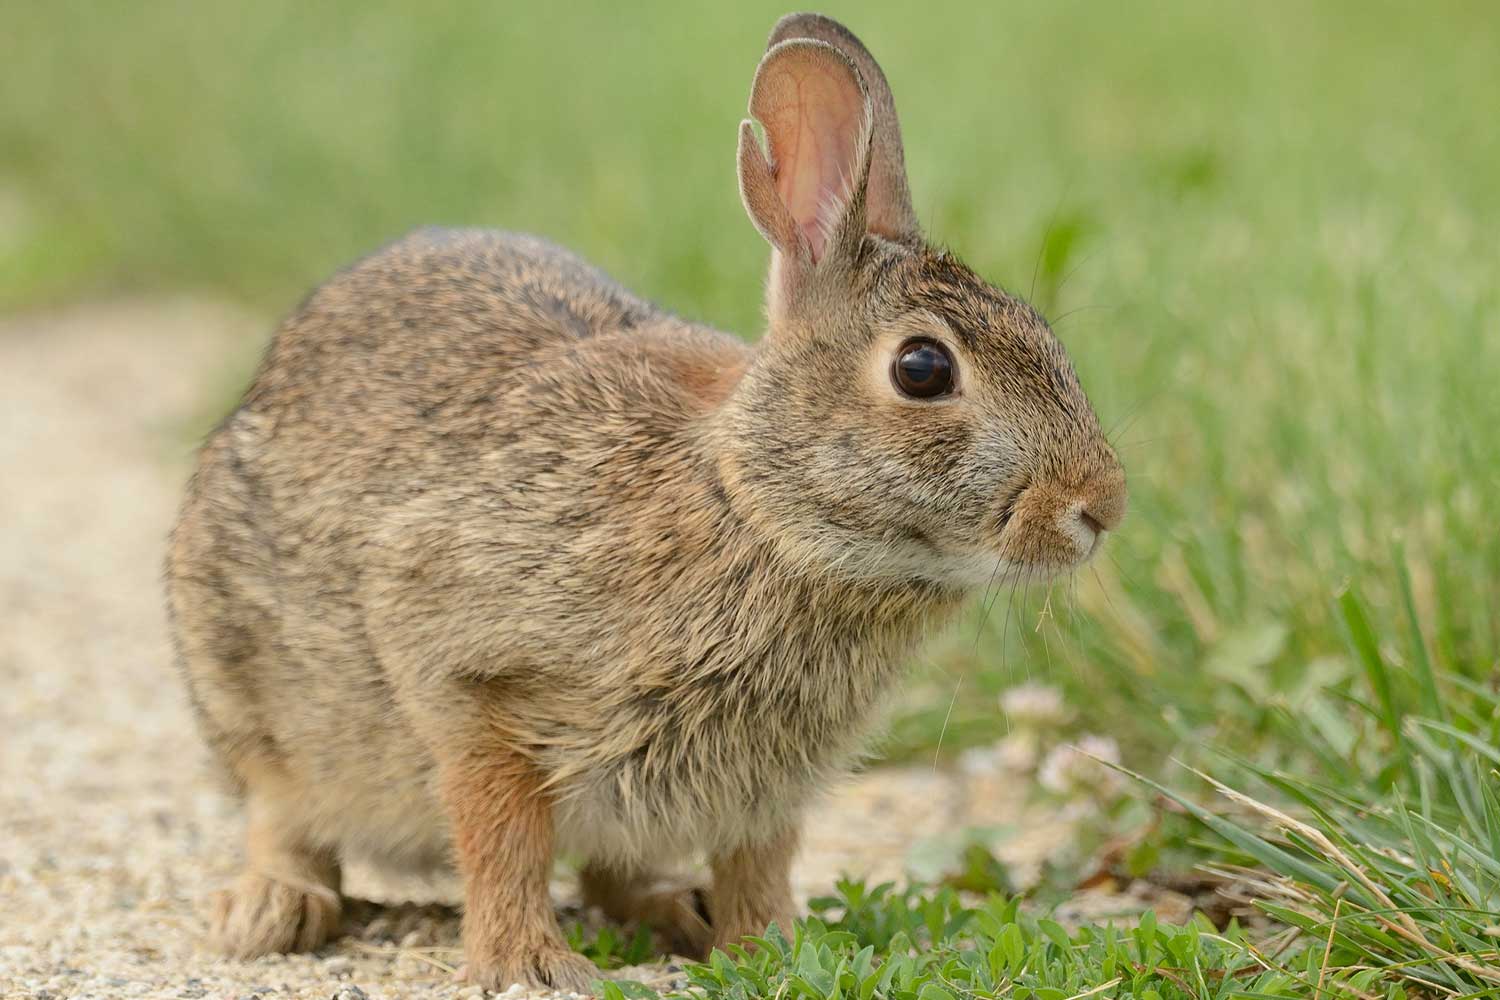 A cottontail rabbit standing at the edge of a trail lined by grass.